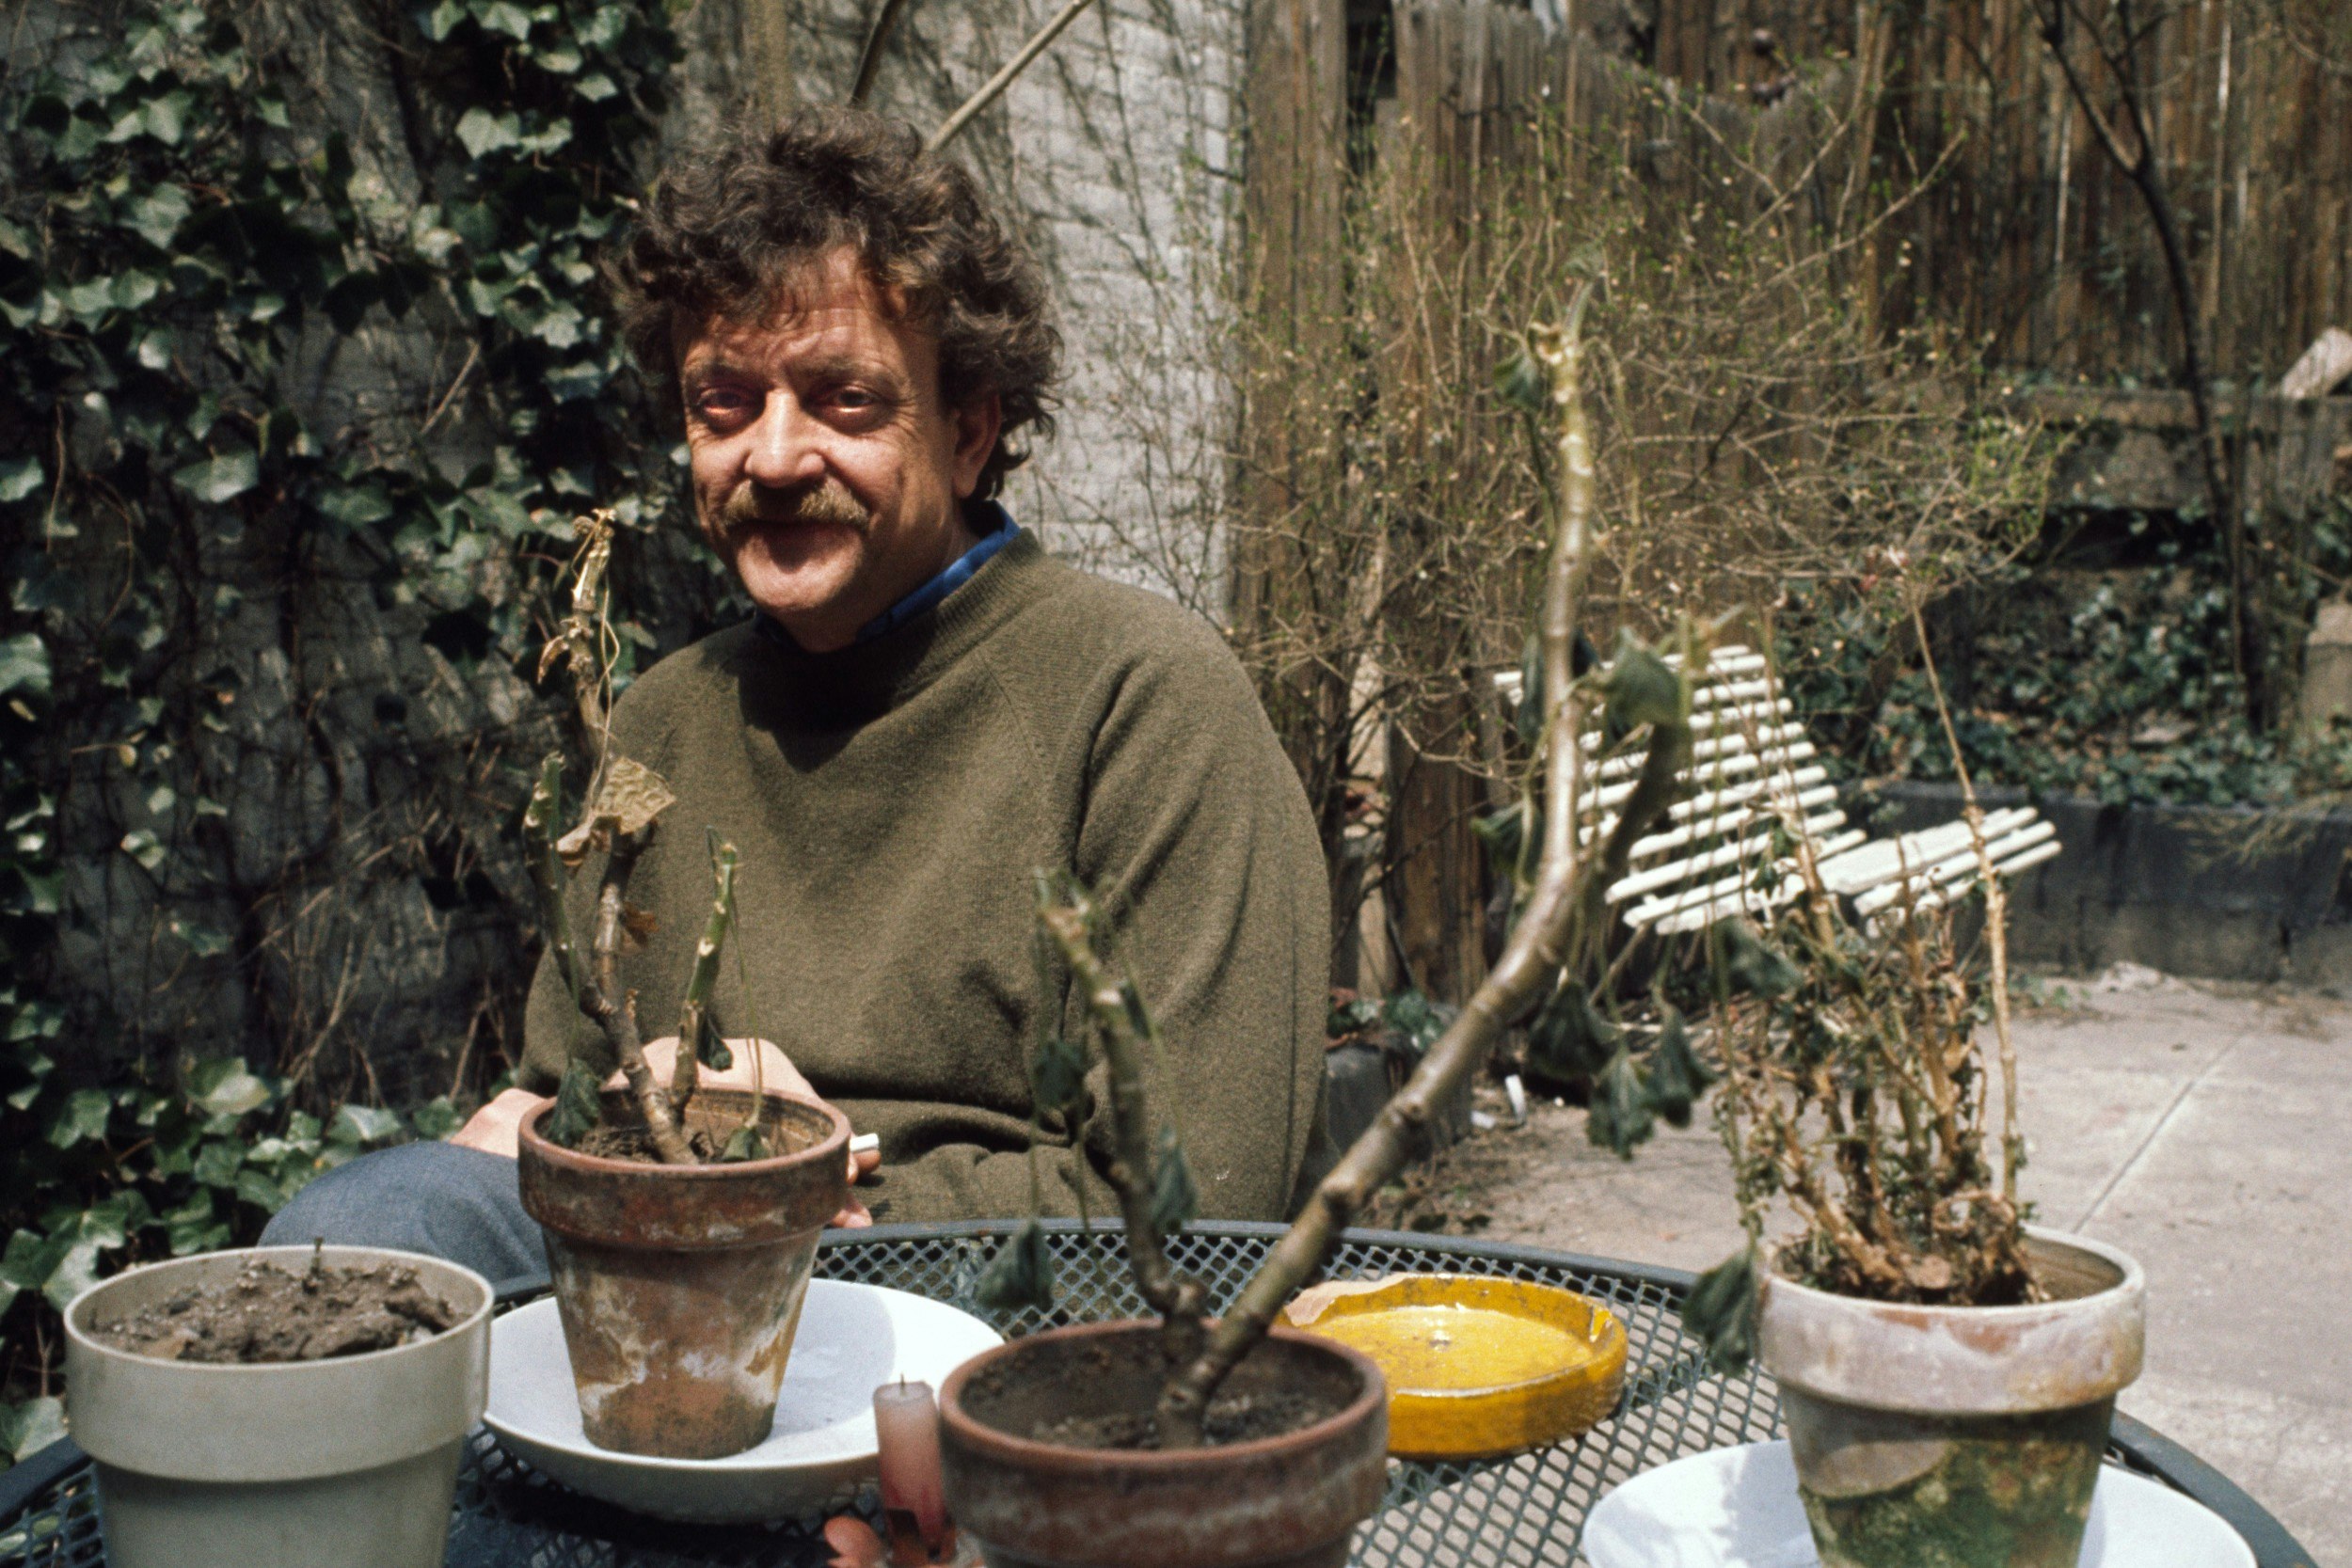 Writer Kurt Vonnegut at home in his garden surrounded by plants and a bench